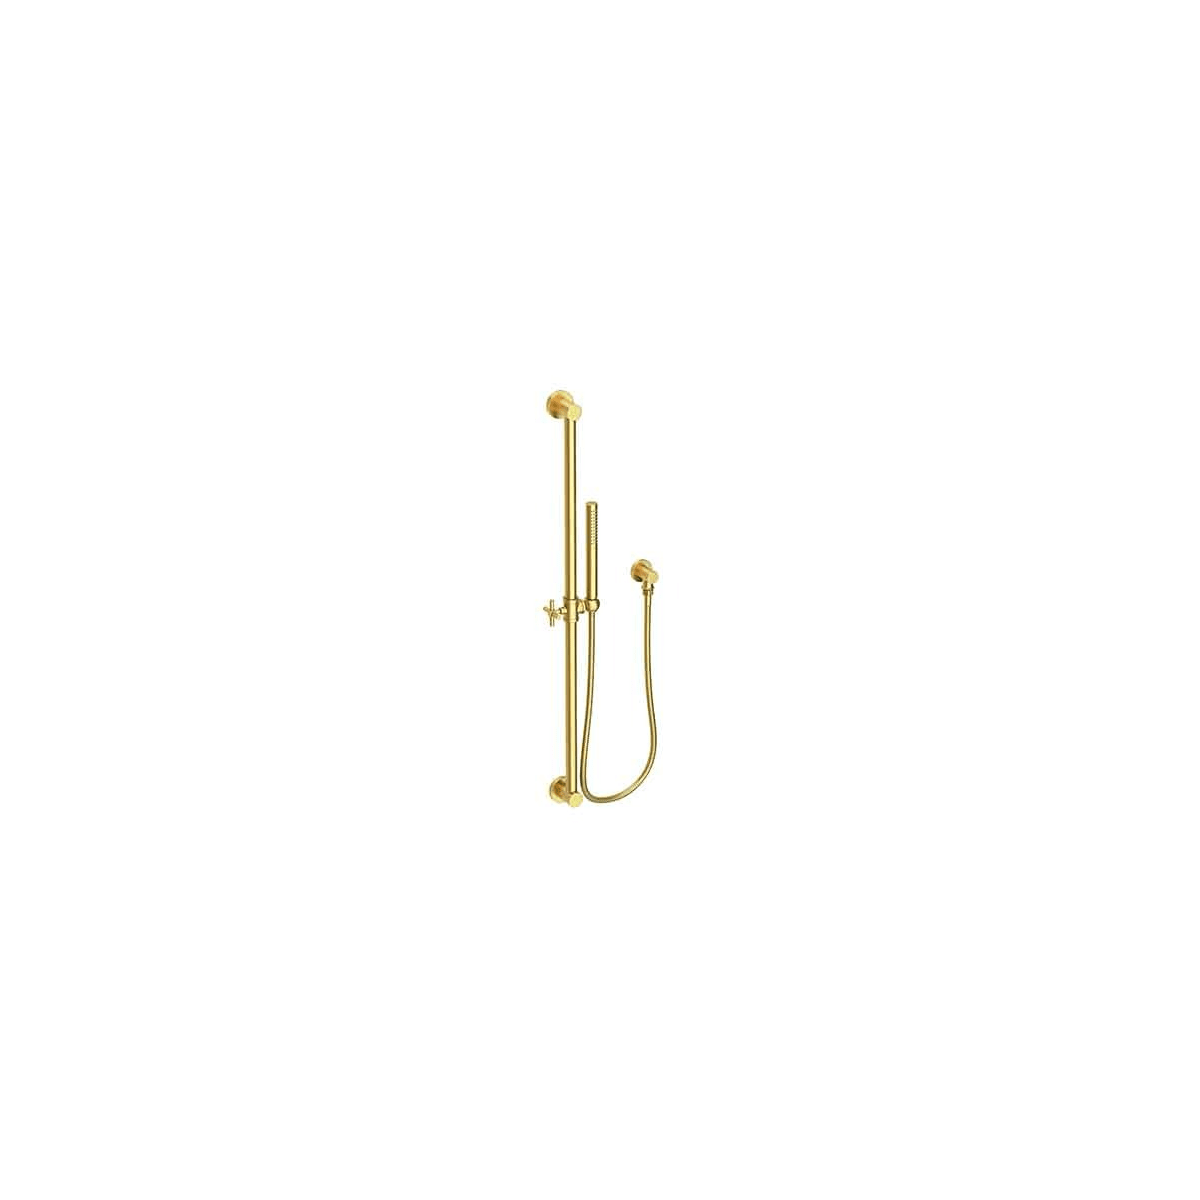 Newport Brass 280T/04 Satin Brass - PVD 1.8 GPM Single Function Hand Shower  Package - Includes Hand Shower, Slide Bar, and Hose 